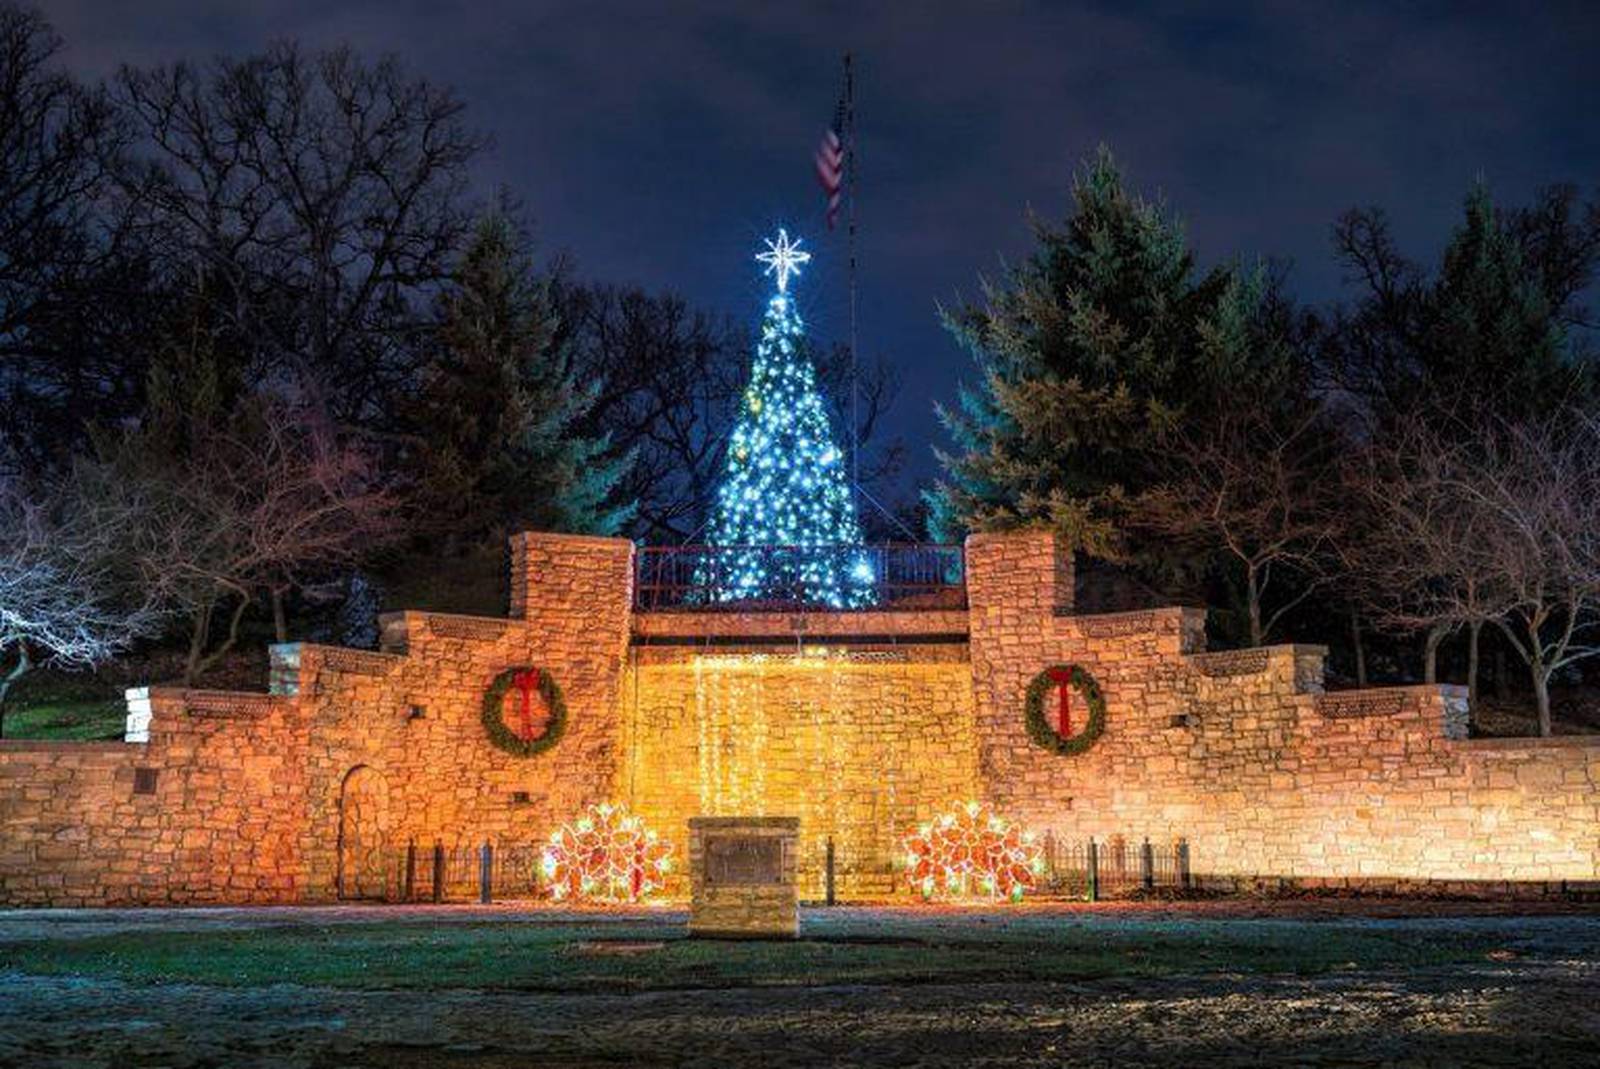 Daily driving tour opens for Festival of Lights transforming Phillips